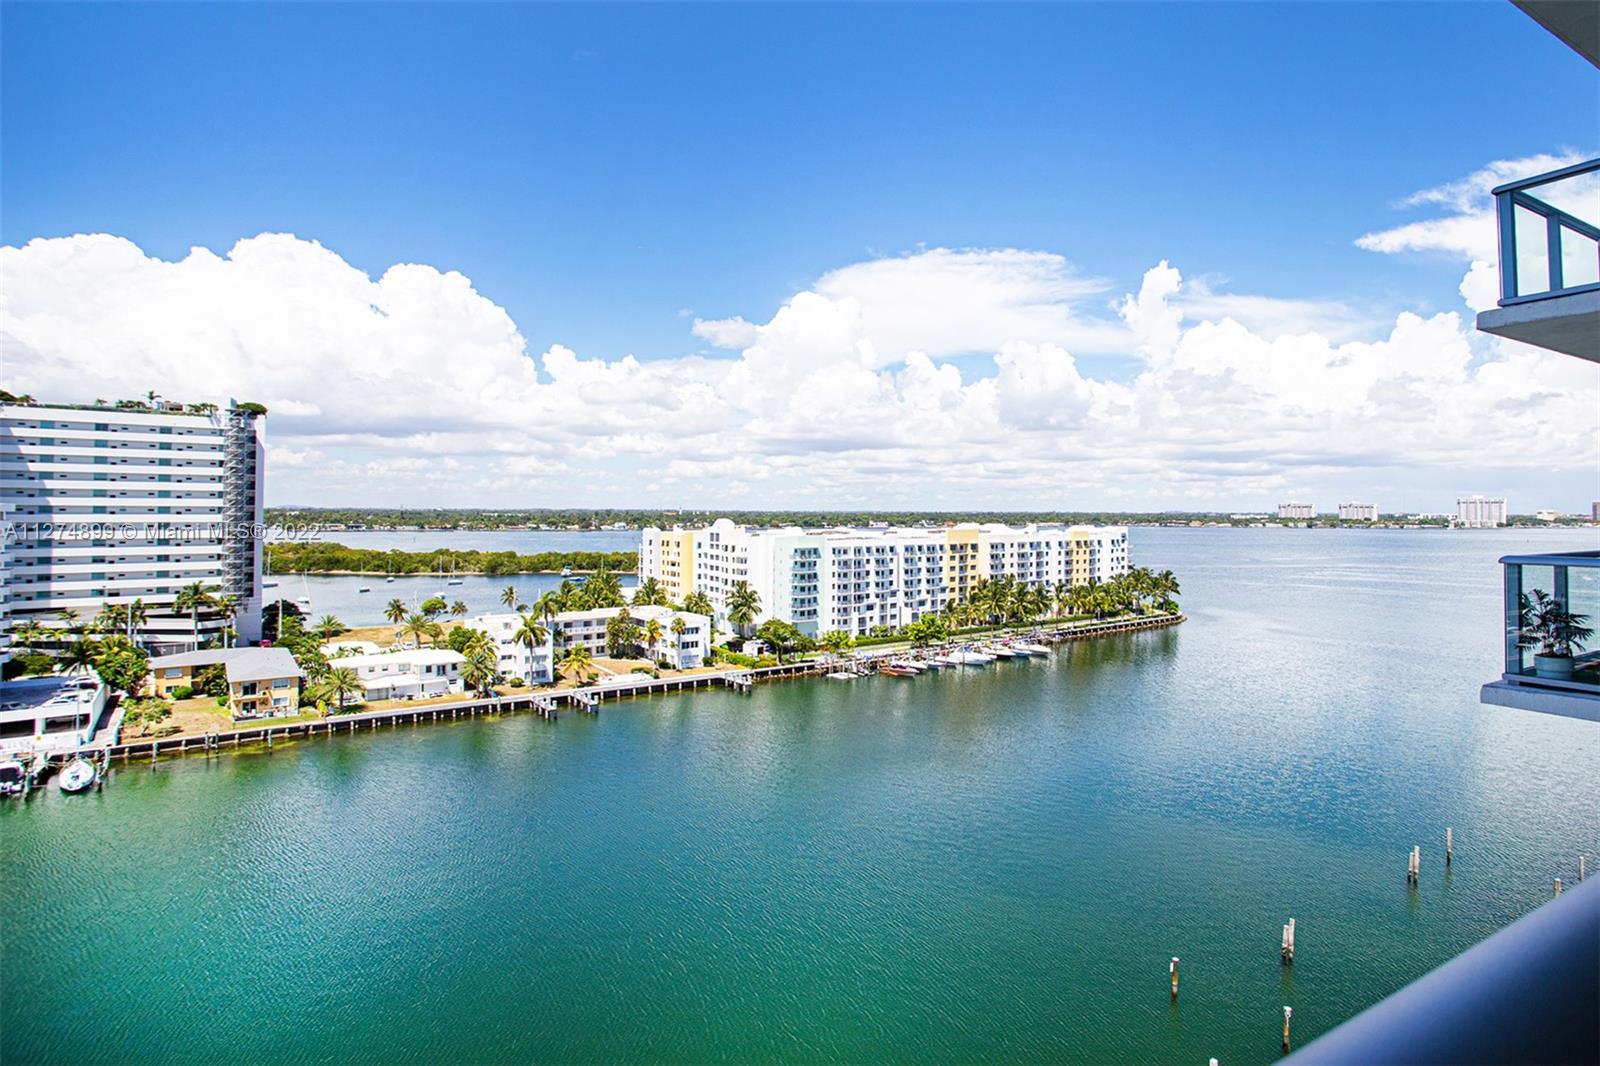 BEAUTIFUL luxury apartment with the greatest water view of Biscayne Bay. This unit it is super illum